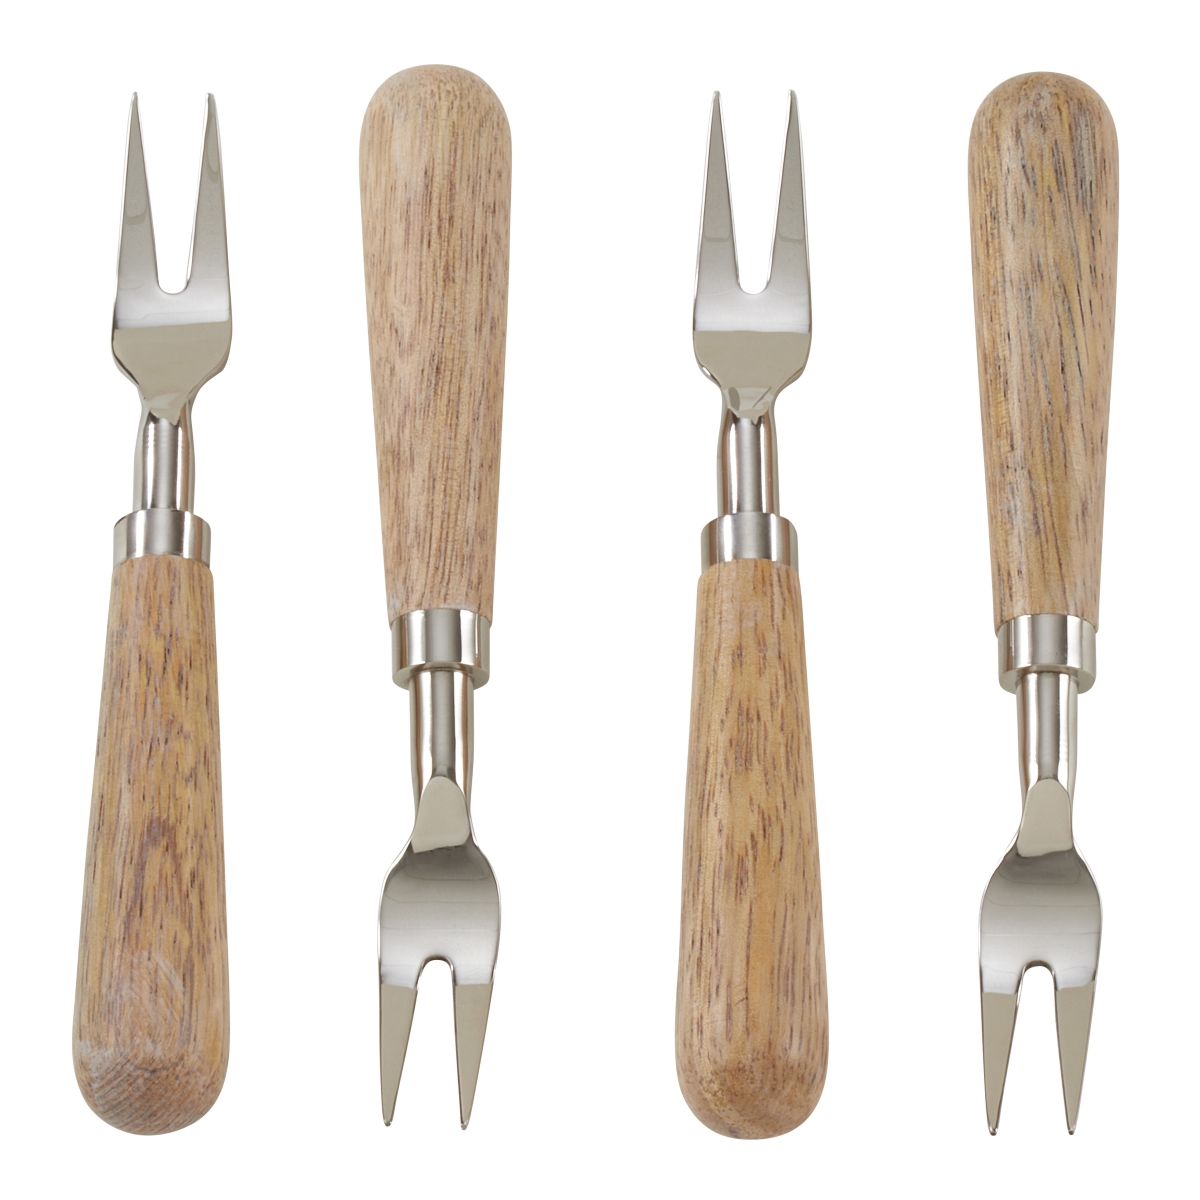 Picture of Saro Lifestyle SP229.N Cocktail Fork Set with Wooden Design - 4 Piece